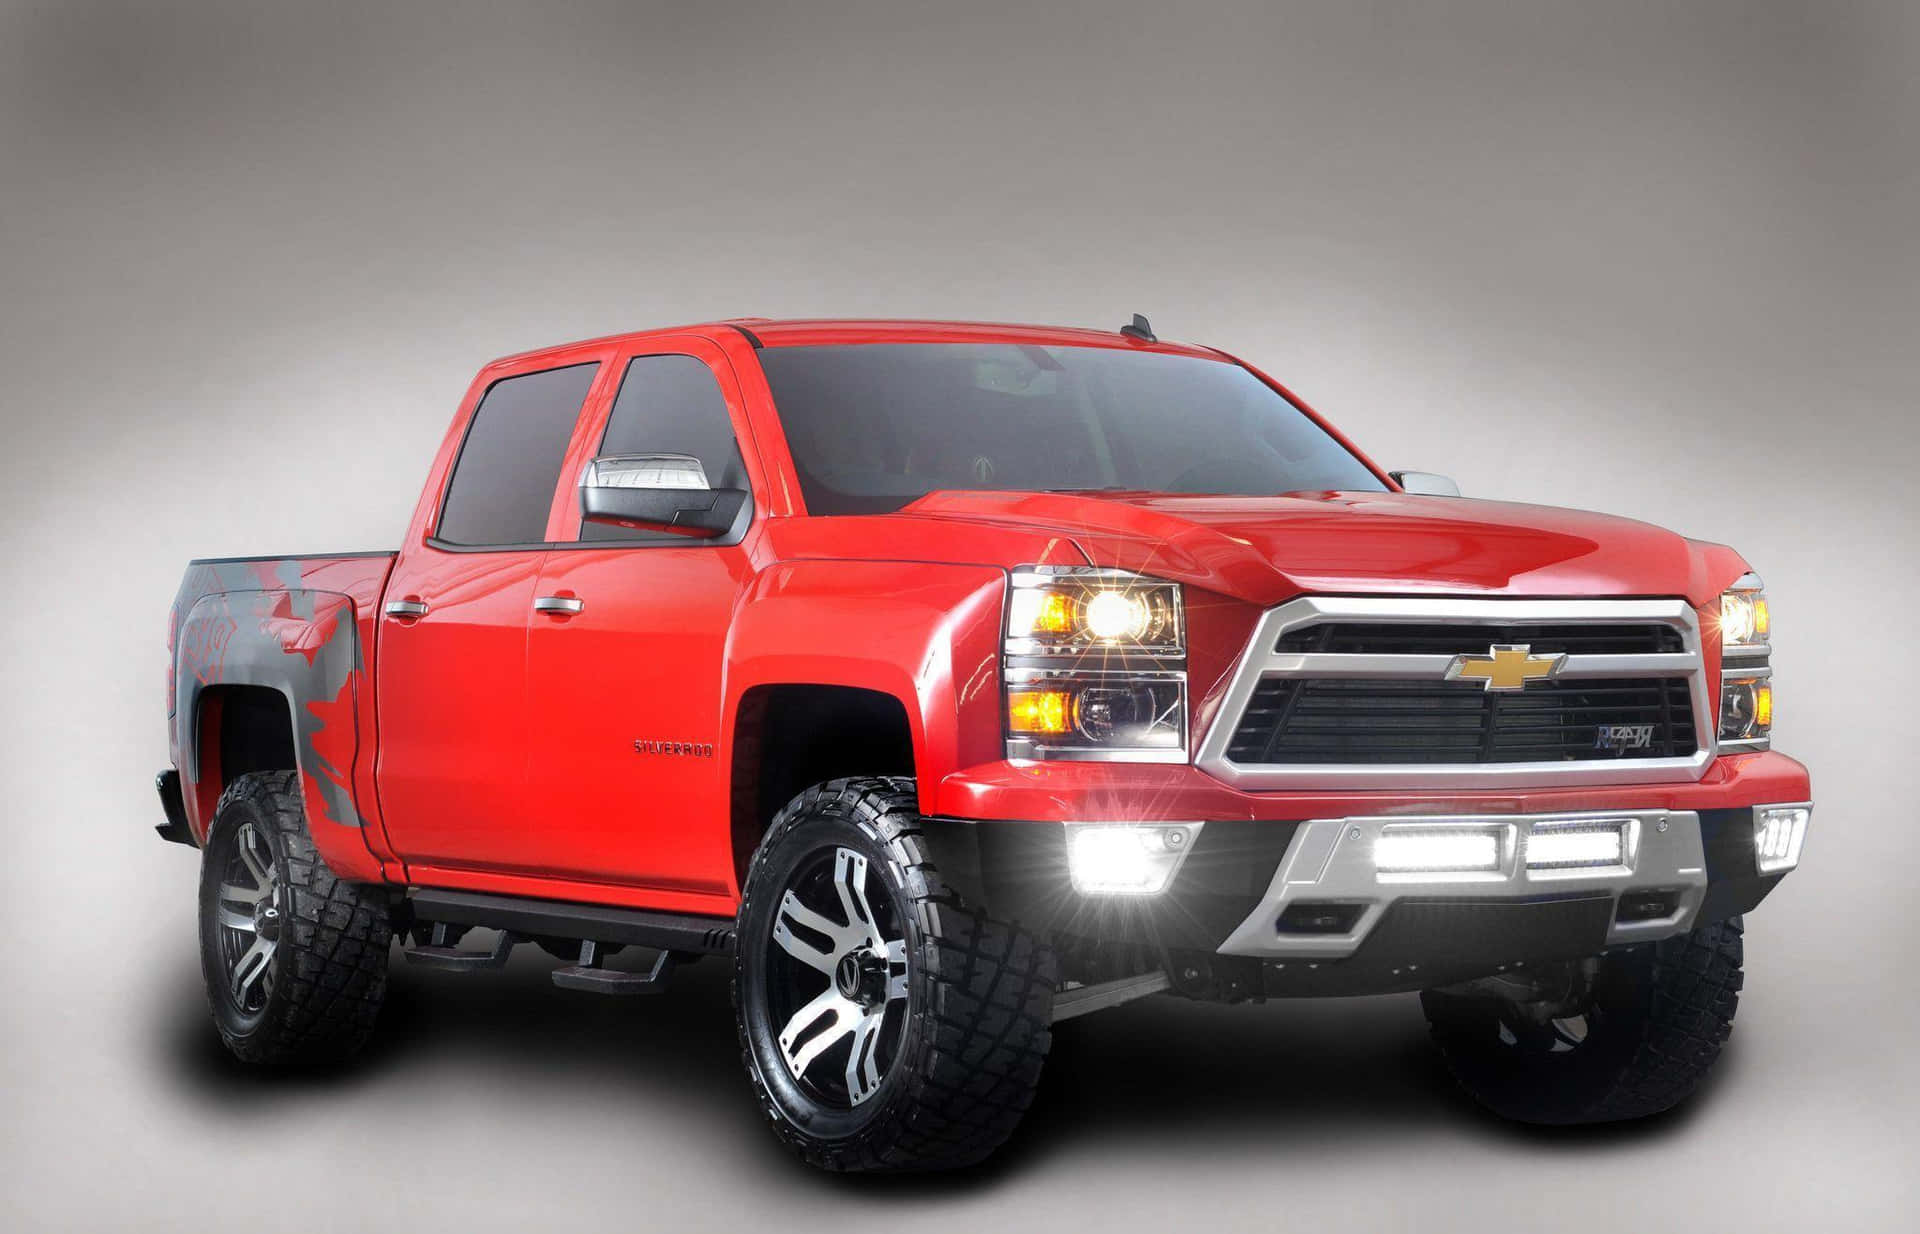 A Red Chevrolet Silverado Truck Is Shown In A Gray Background Background